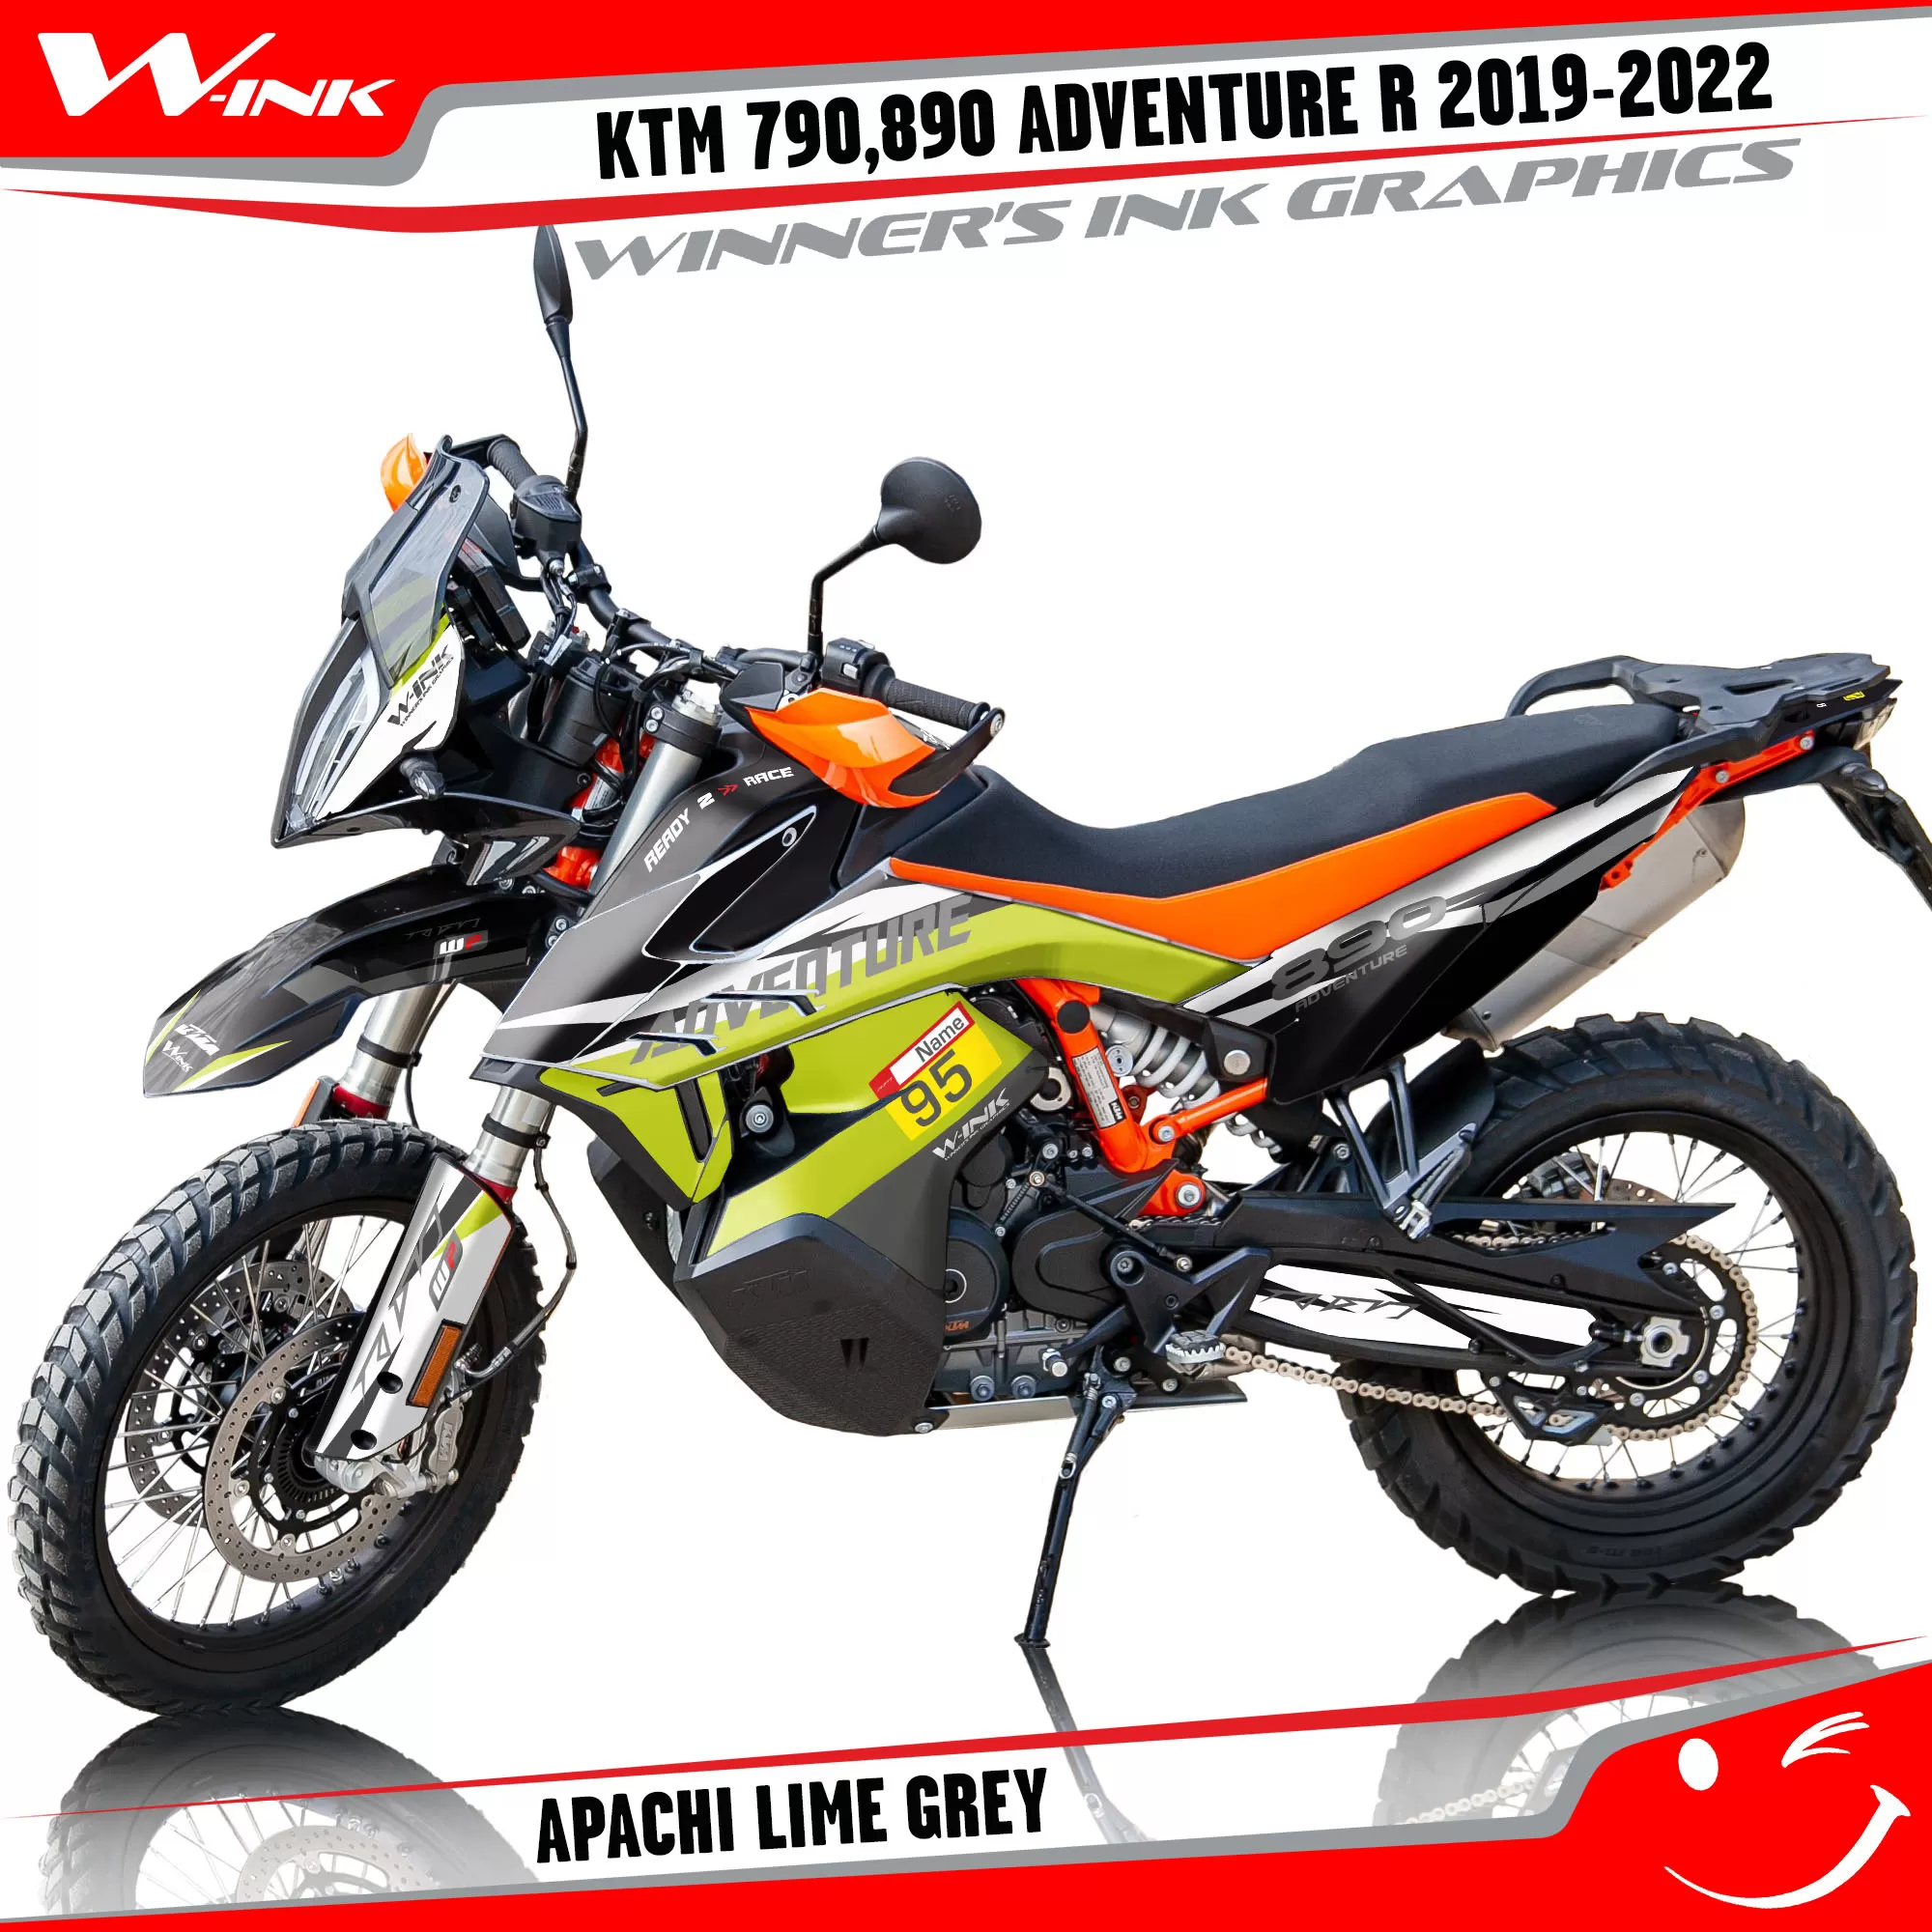 Adventure-R-790-890-2019-2020-2021-2022-graphics-kit-and-decals-with-designs-Apachi-Lime-Grey